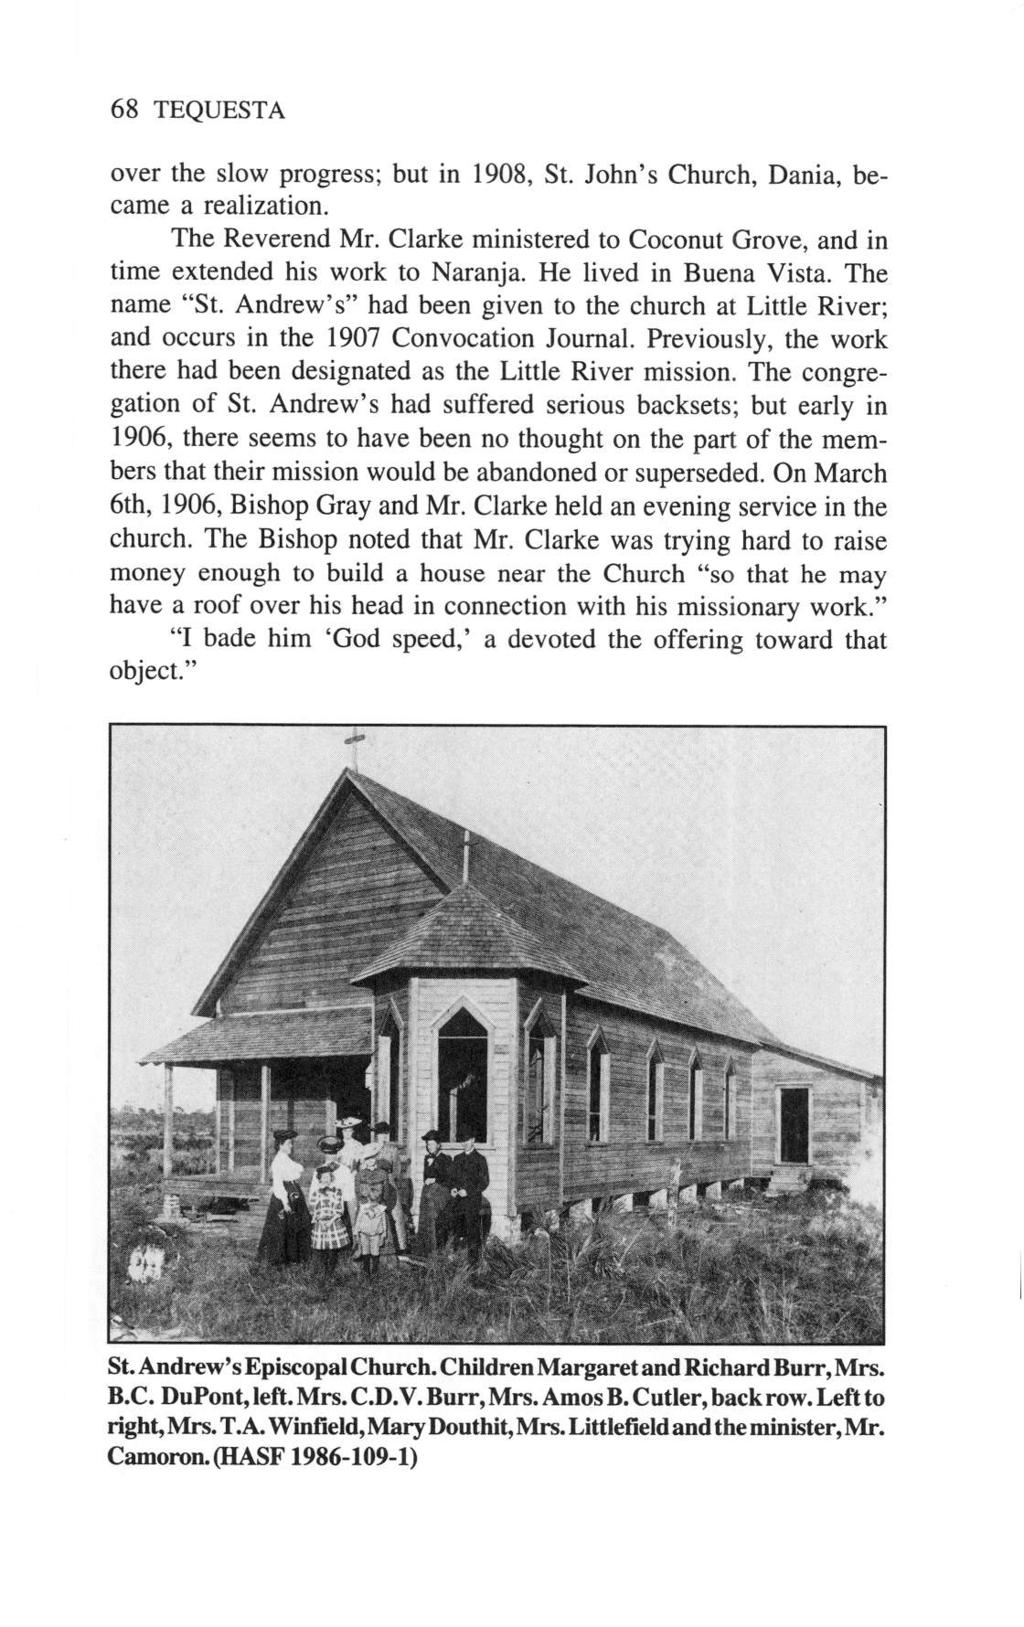 68 TEQUESTA over the slow progress; but in 1908, St. John's Church, Dania, became a realization. The Reverend Mr. Clarke ministered to Coconut Grove, and in time extended his work to Naranja.